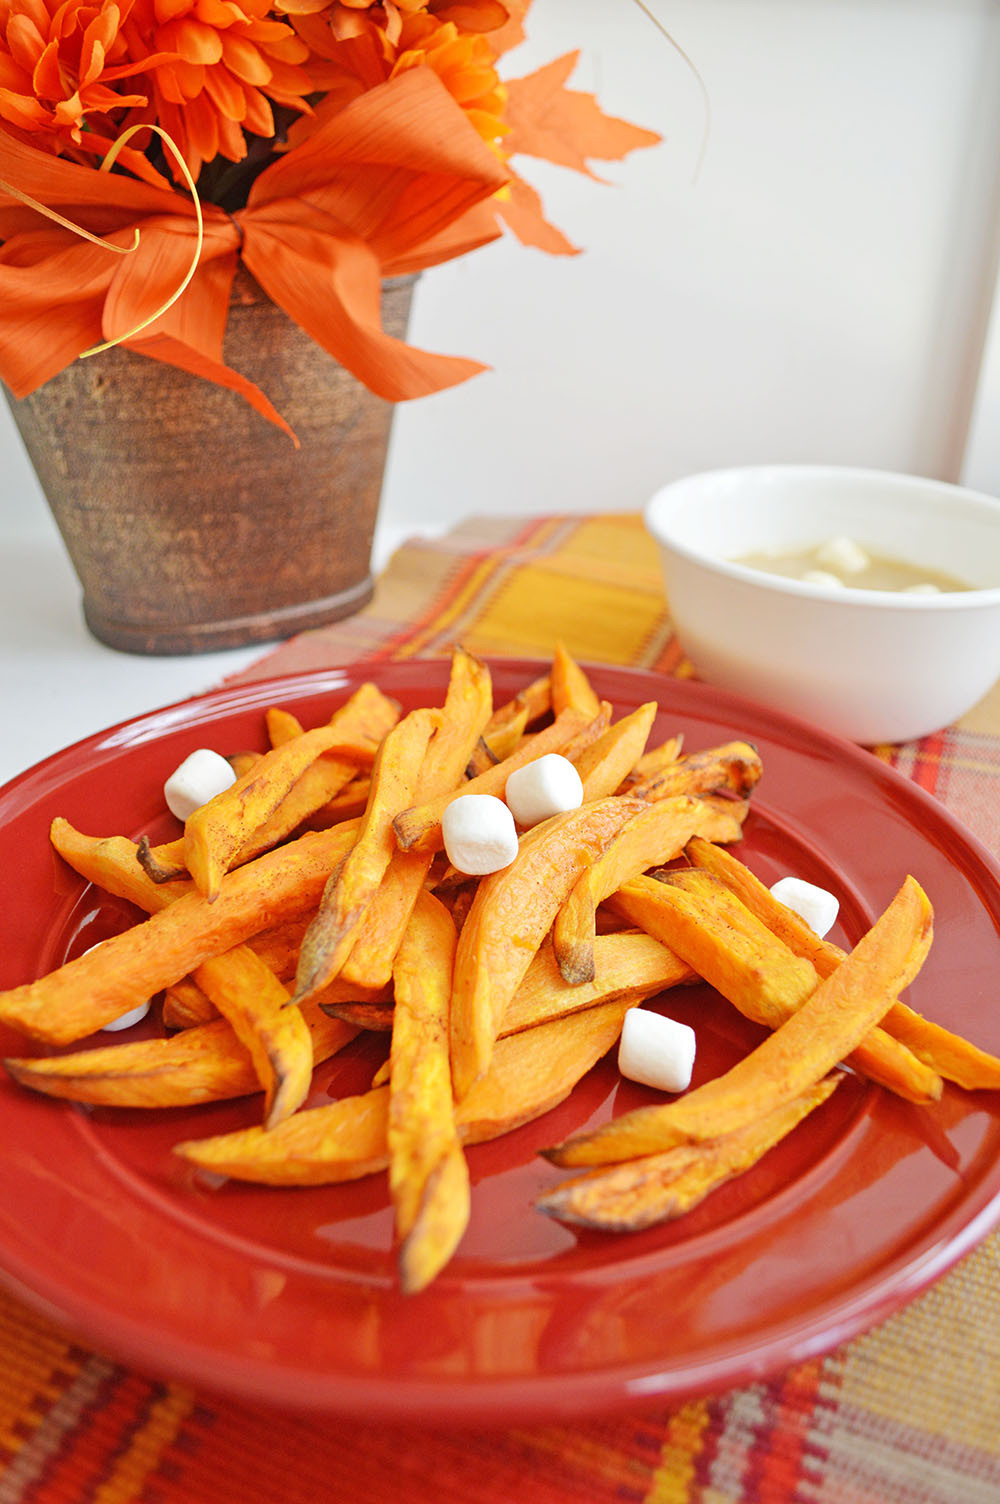 Sweet Potato Fries In Air Fryer
 Air Fryer Sweet Potato Fries with Marshmallow Dipping